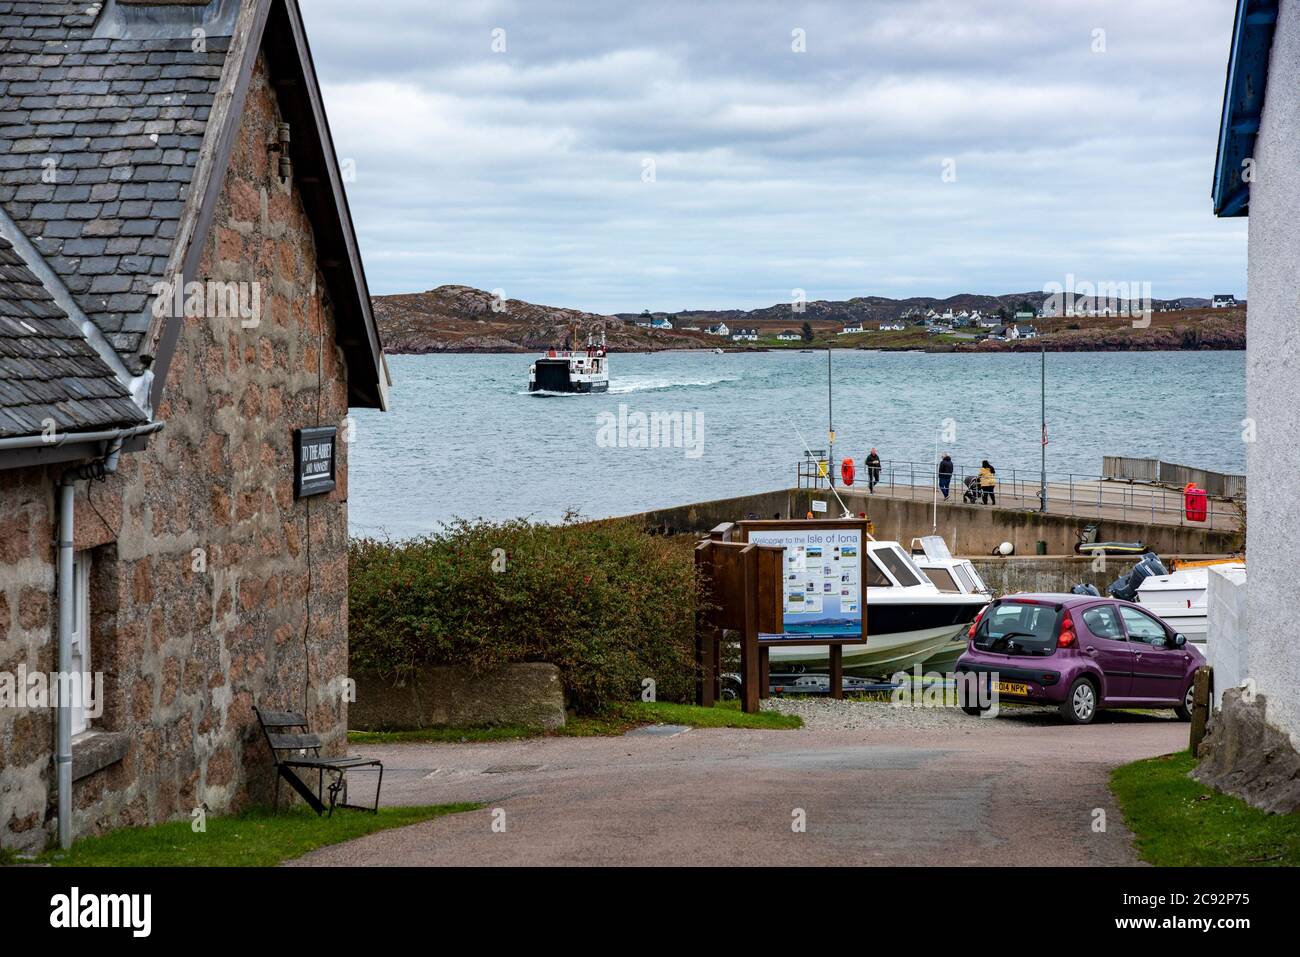 Iona ferry,Iona, Inner Hebrides off the Ross of Mull, Argyll and Bute, Scotland, United Kingdom. Stock Photo